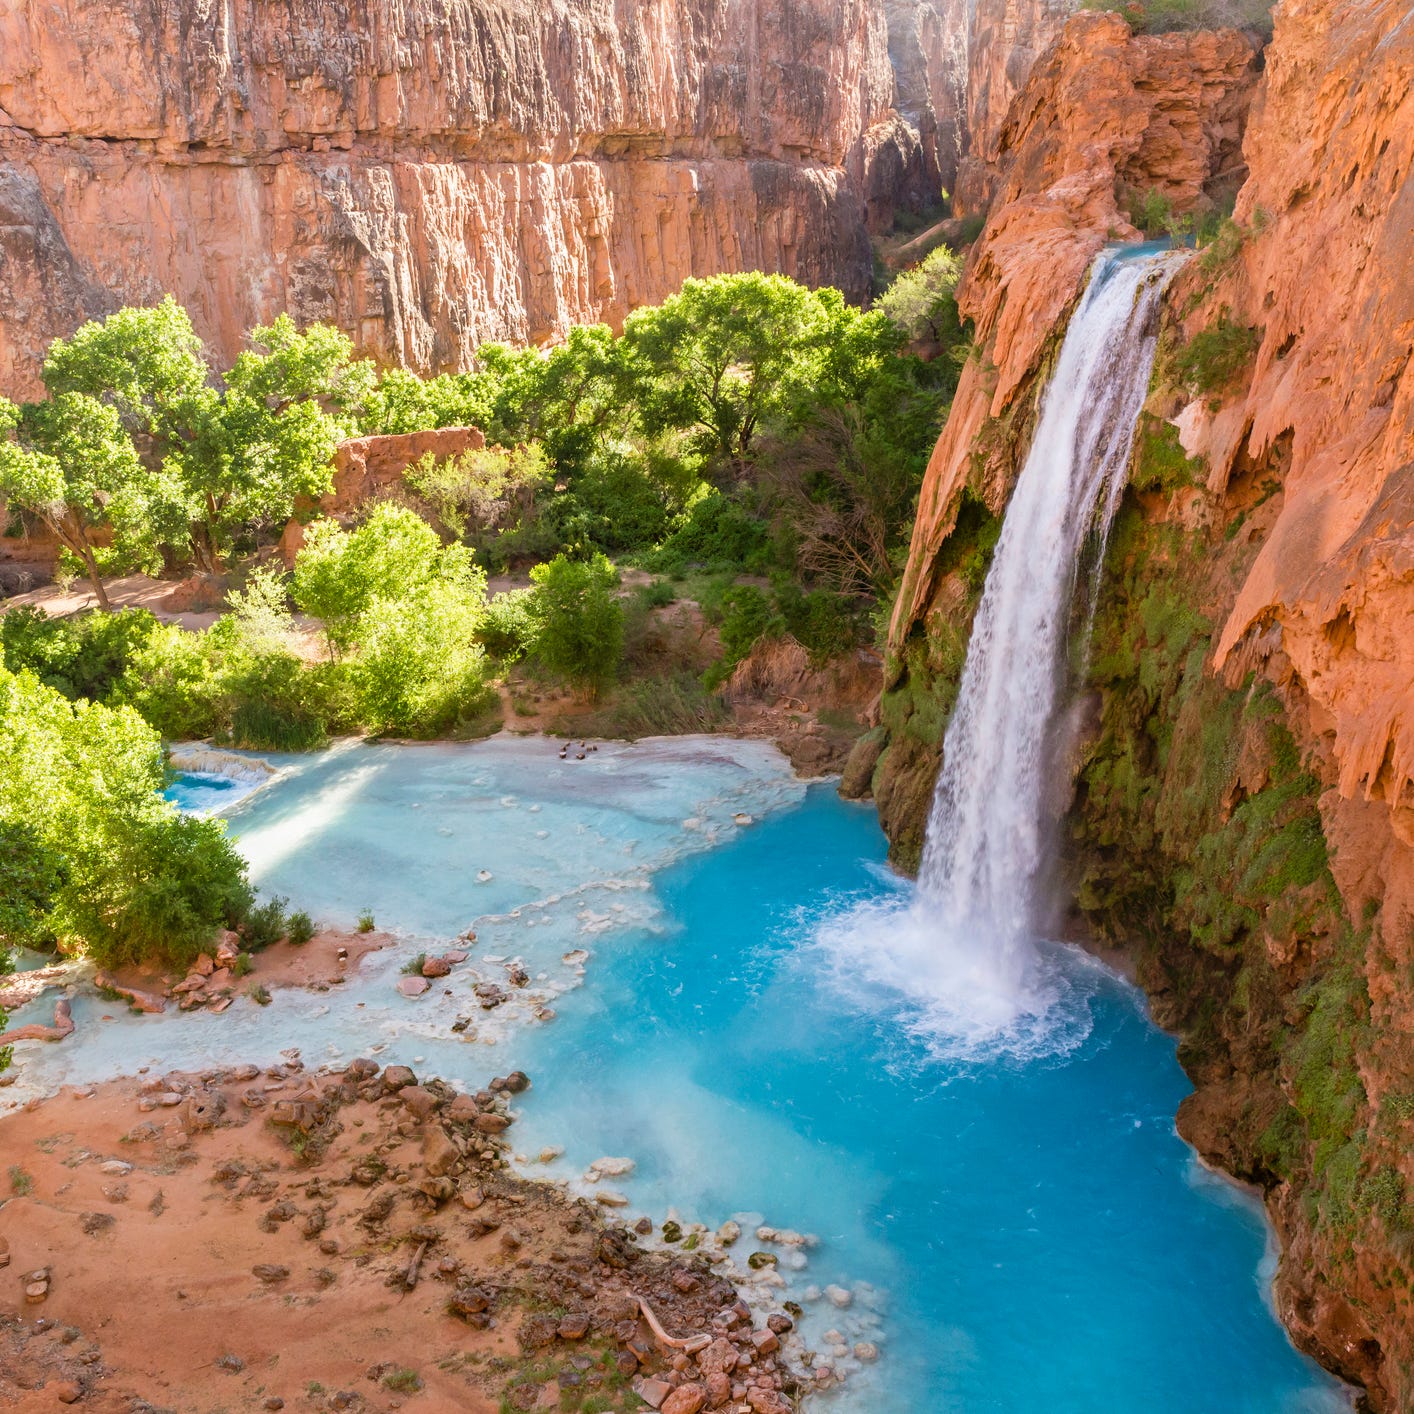 Hidden deep in the heart of the Grand Canyon, the bright blue waters of the creek spill over a cliff as Havasupai Falls, filling up a temptingly colored pool that entices swimmers to cool off in the desert heat.